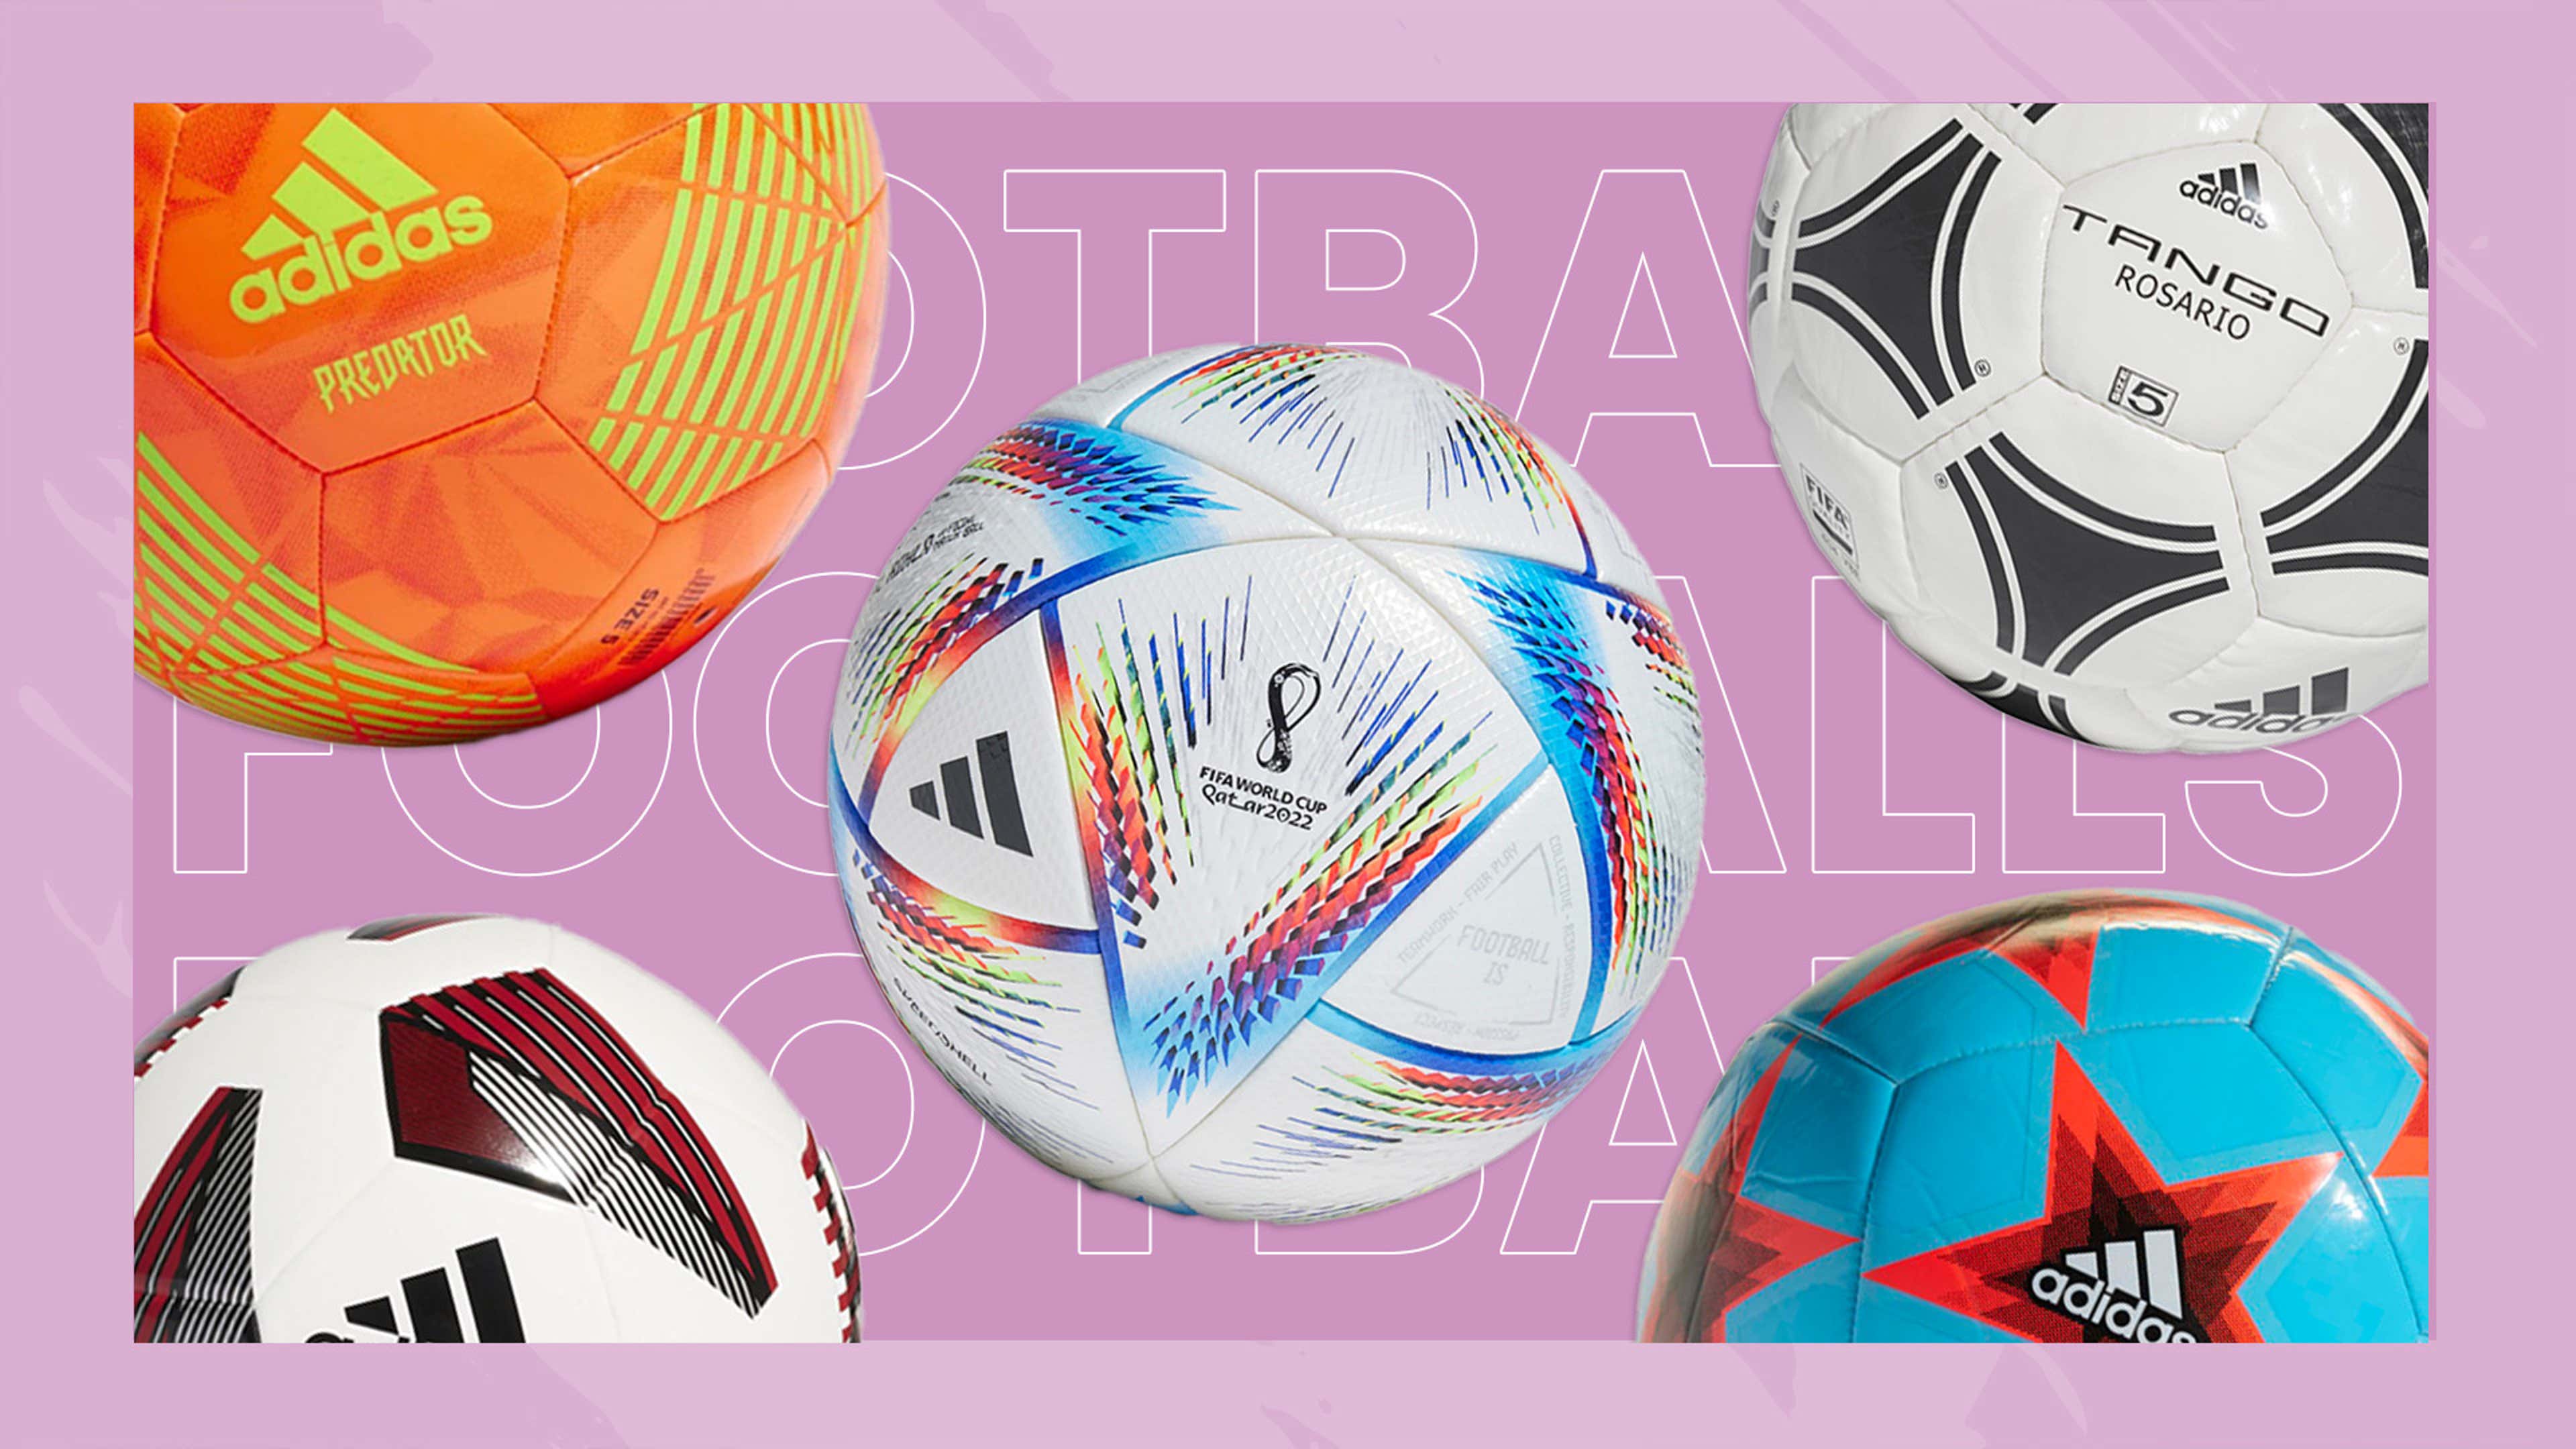 sugerir bolso color The best adidas footballs you can buy in 2023 | Goal.com US